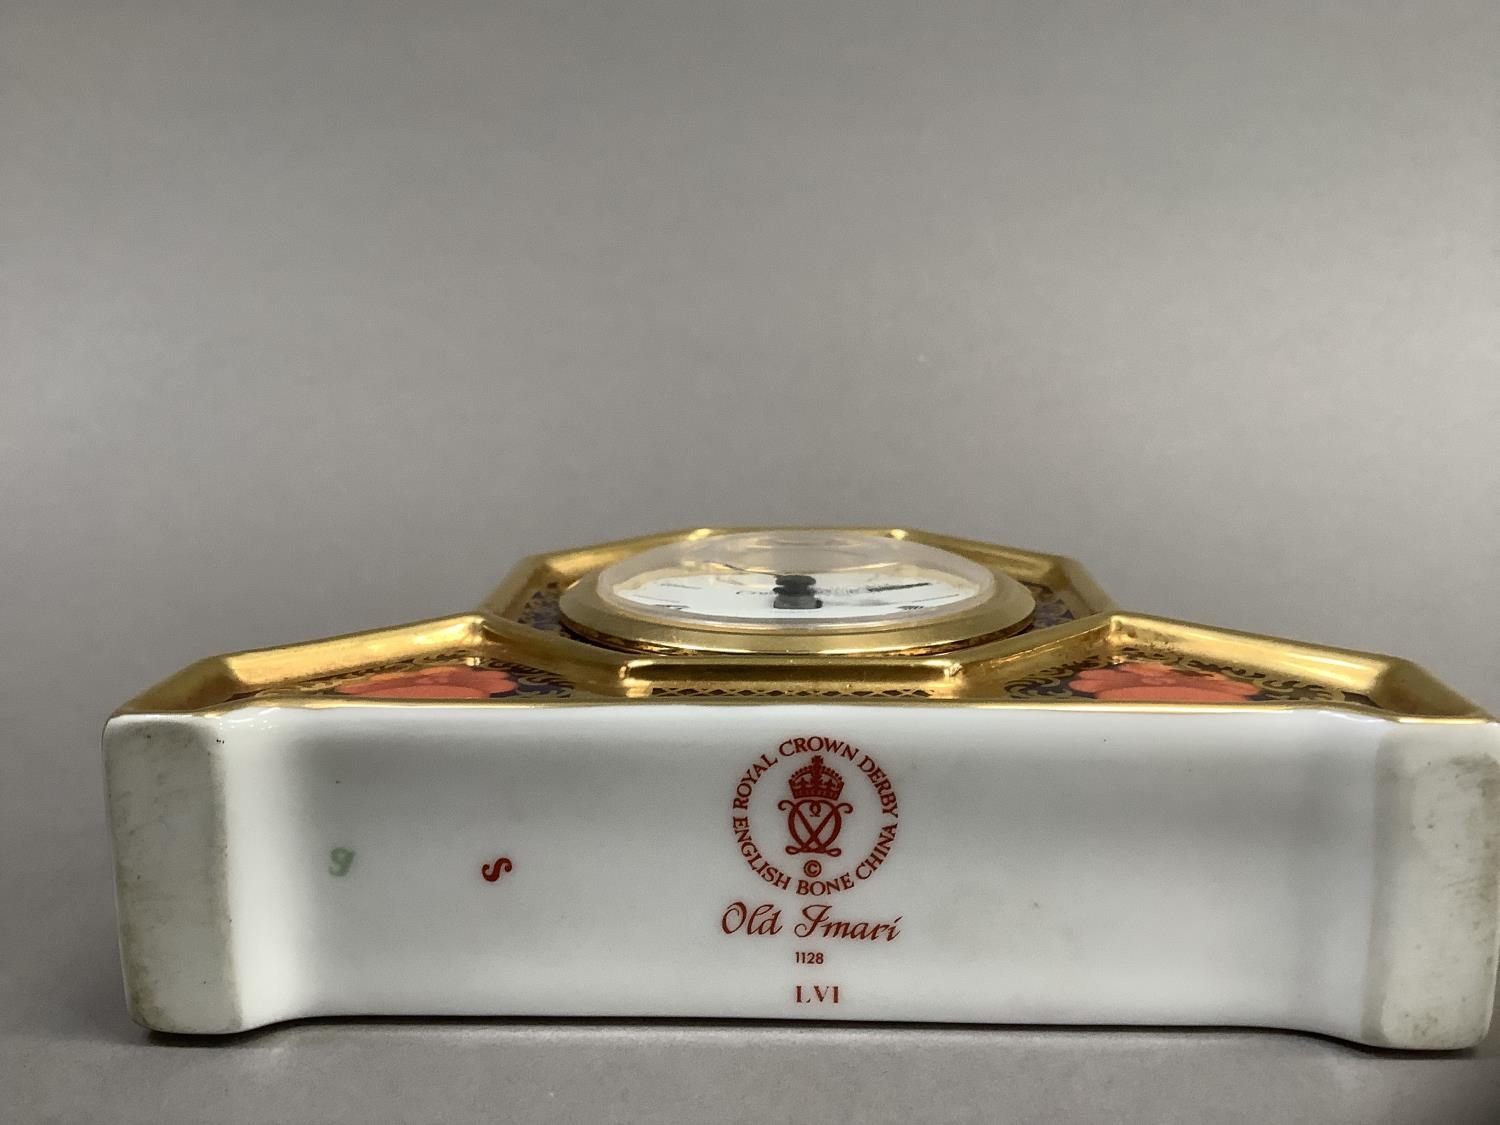 A Royal Crown Derby mantle clock of old Imari pattern 1128 10.5cm high - Image 6 of 6